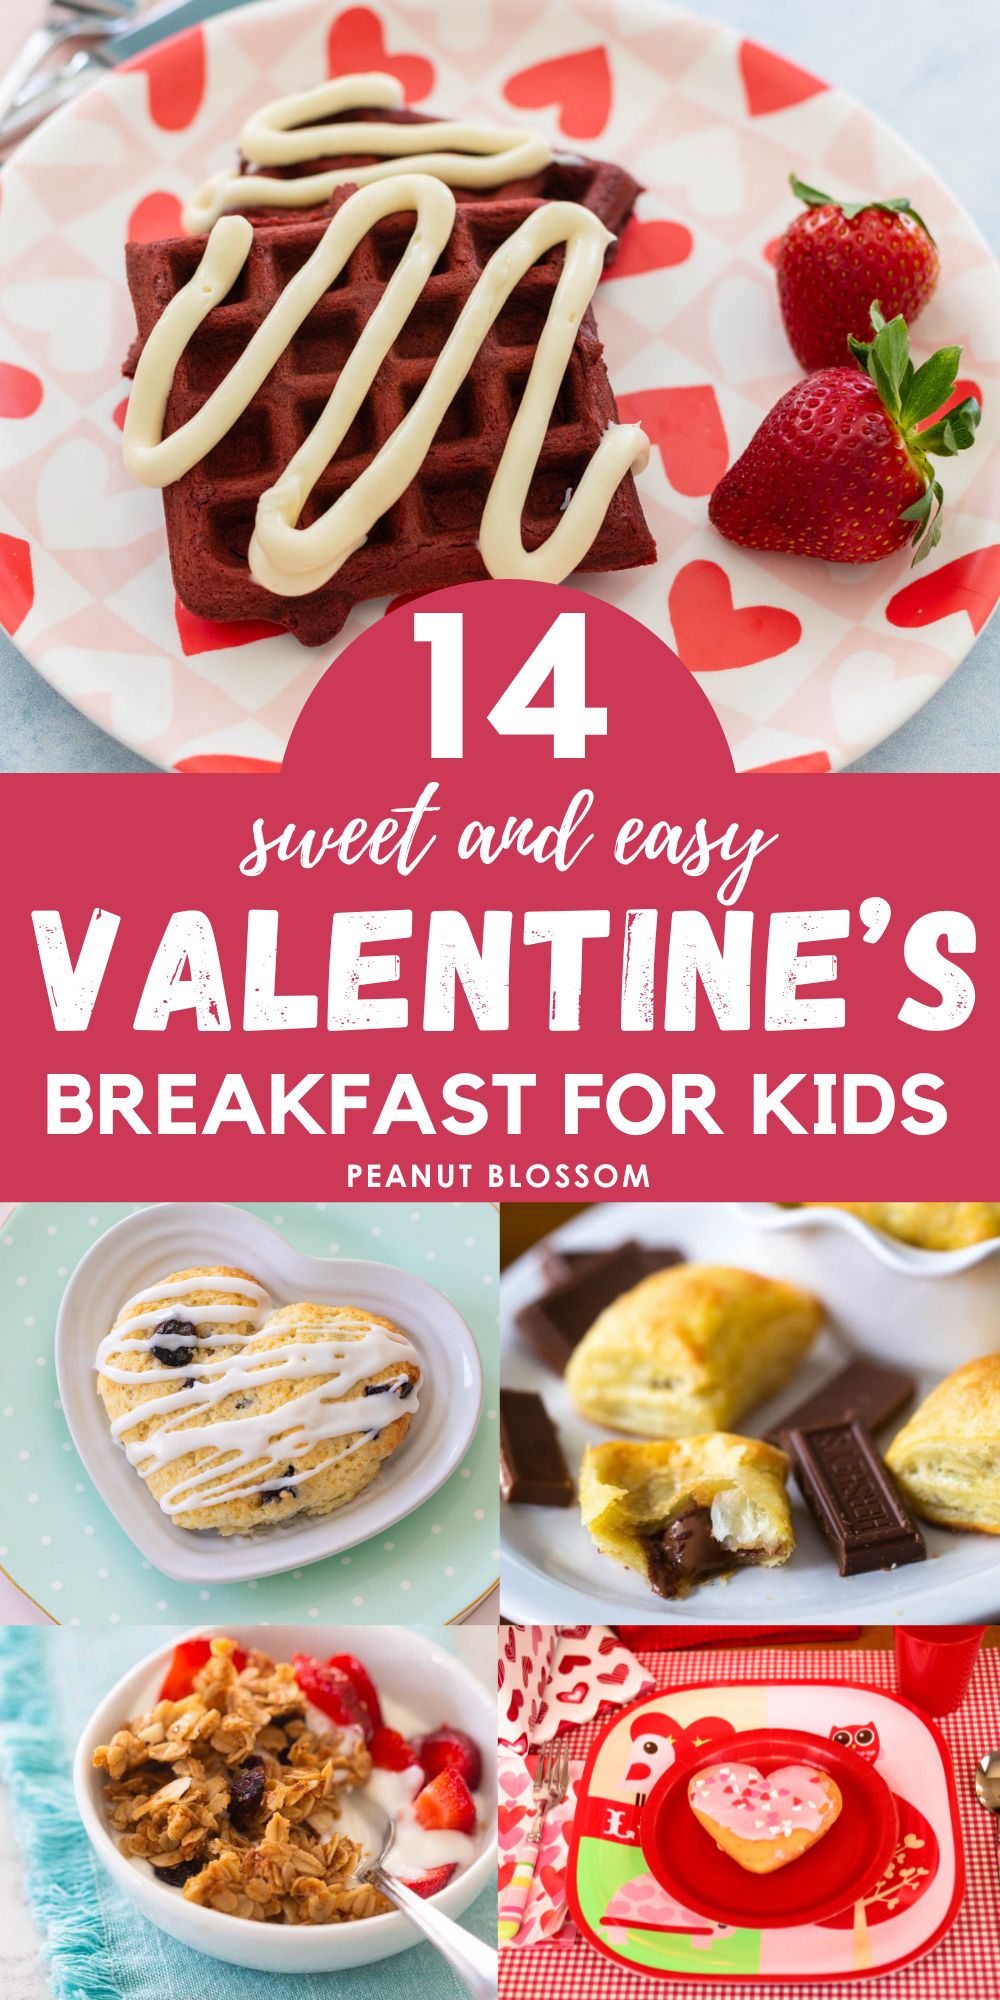 The photo collage shows 5 easy Valentine's Day breakfast ideas for kids including waffles, scones, and donuts.